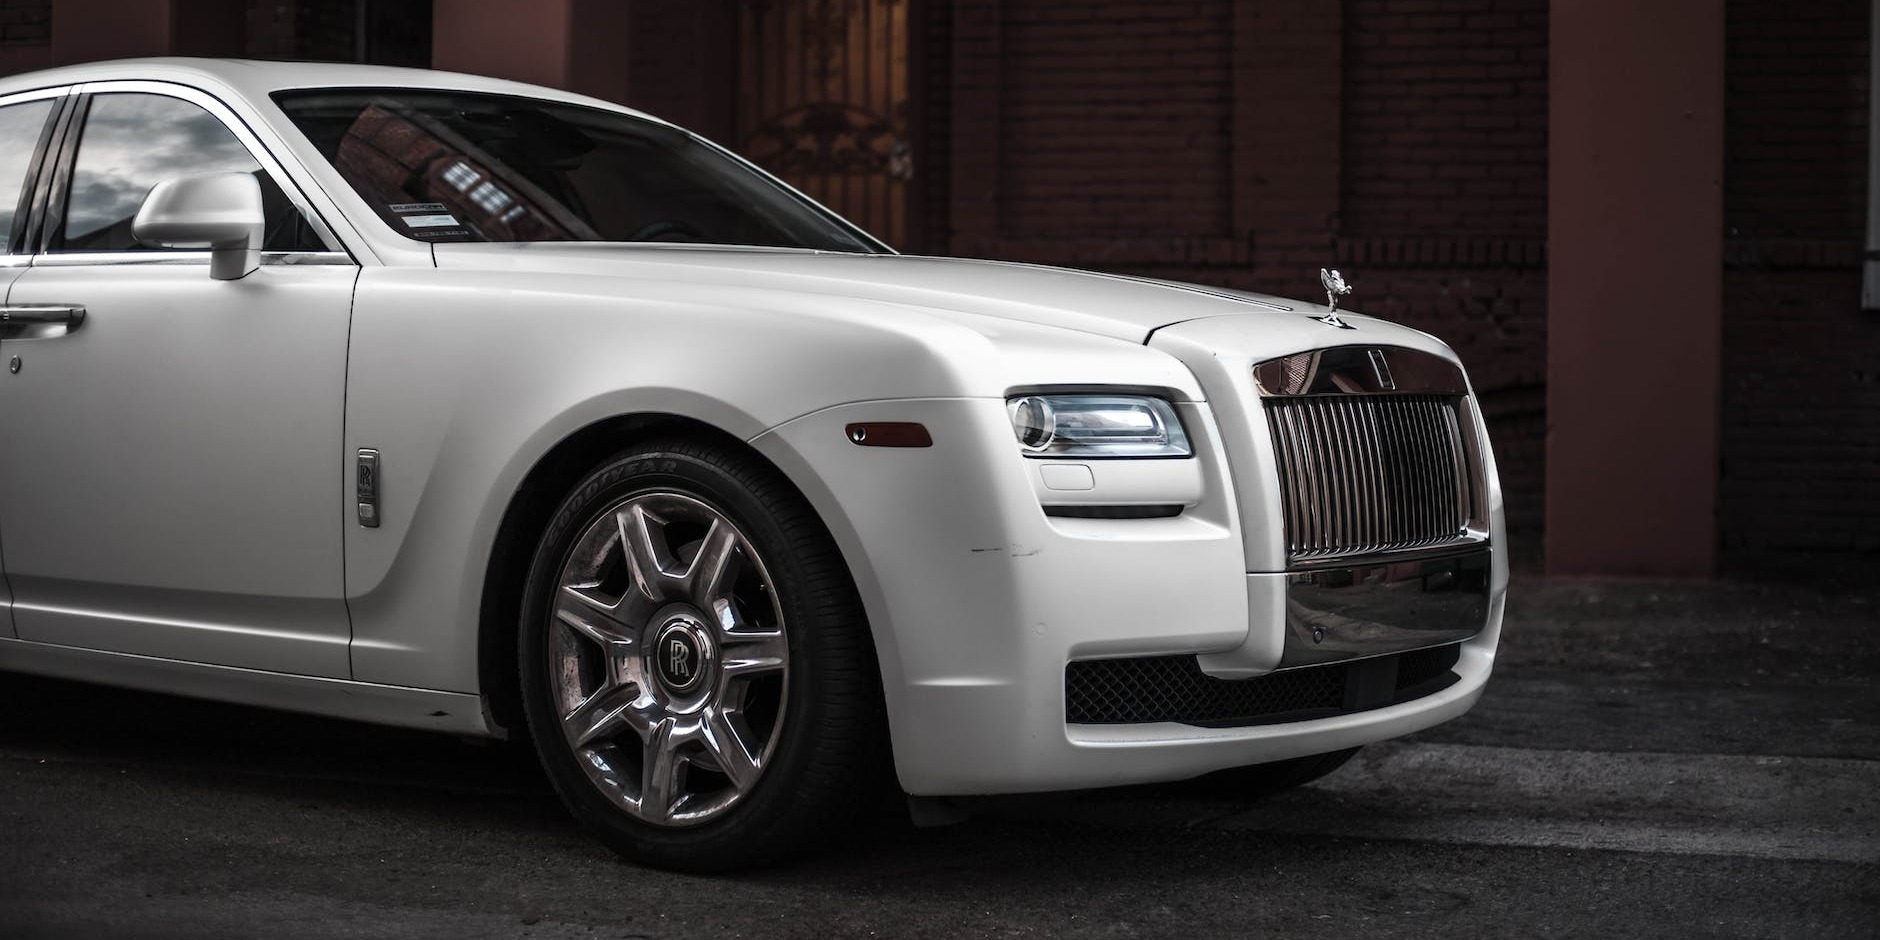 Special Date Nights: Elevating Romantic Evenings with a Rolls Royce Ghost